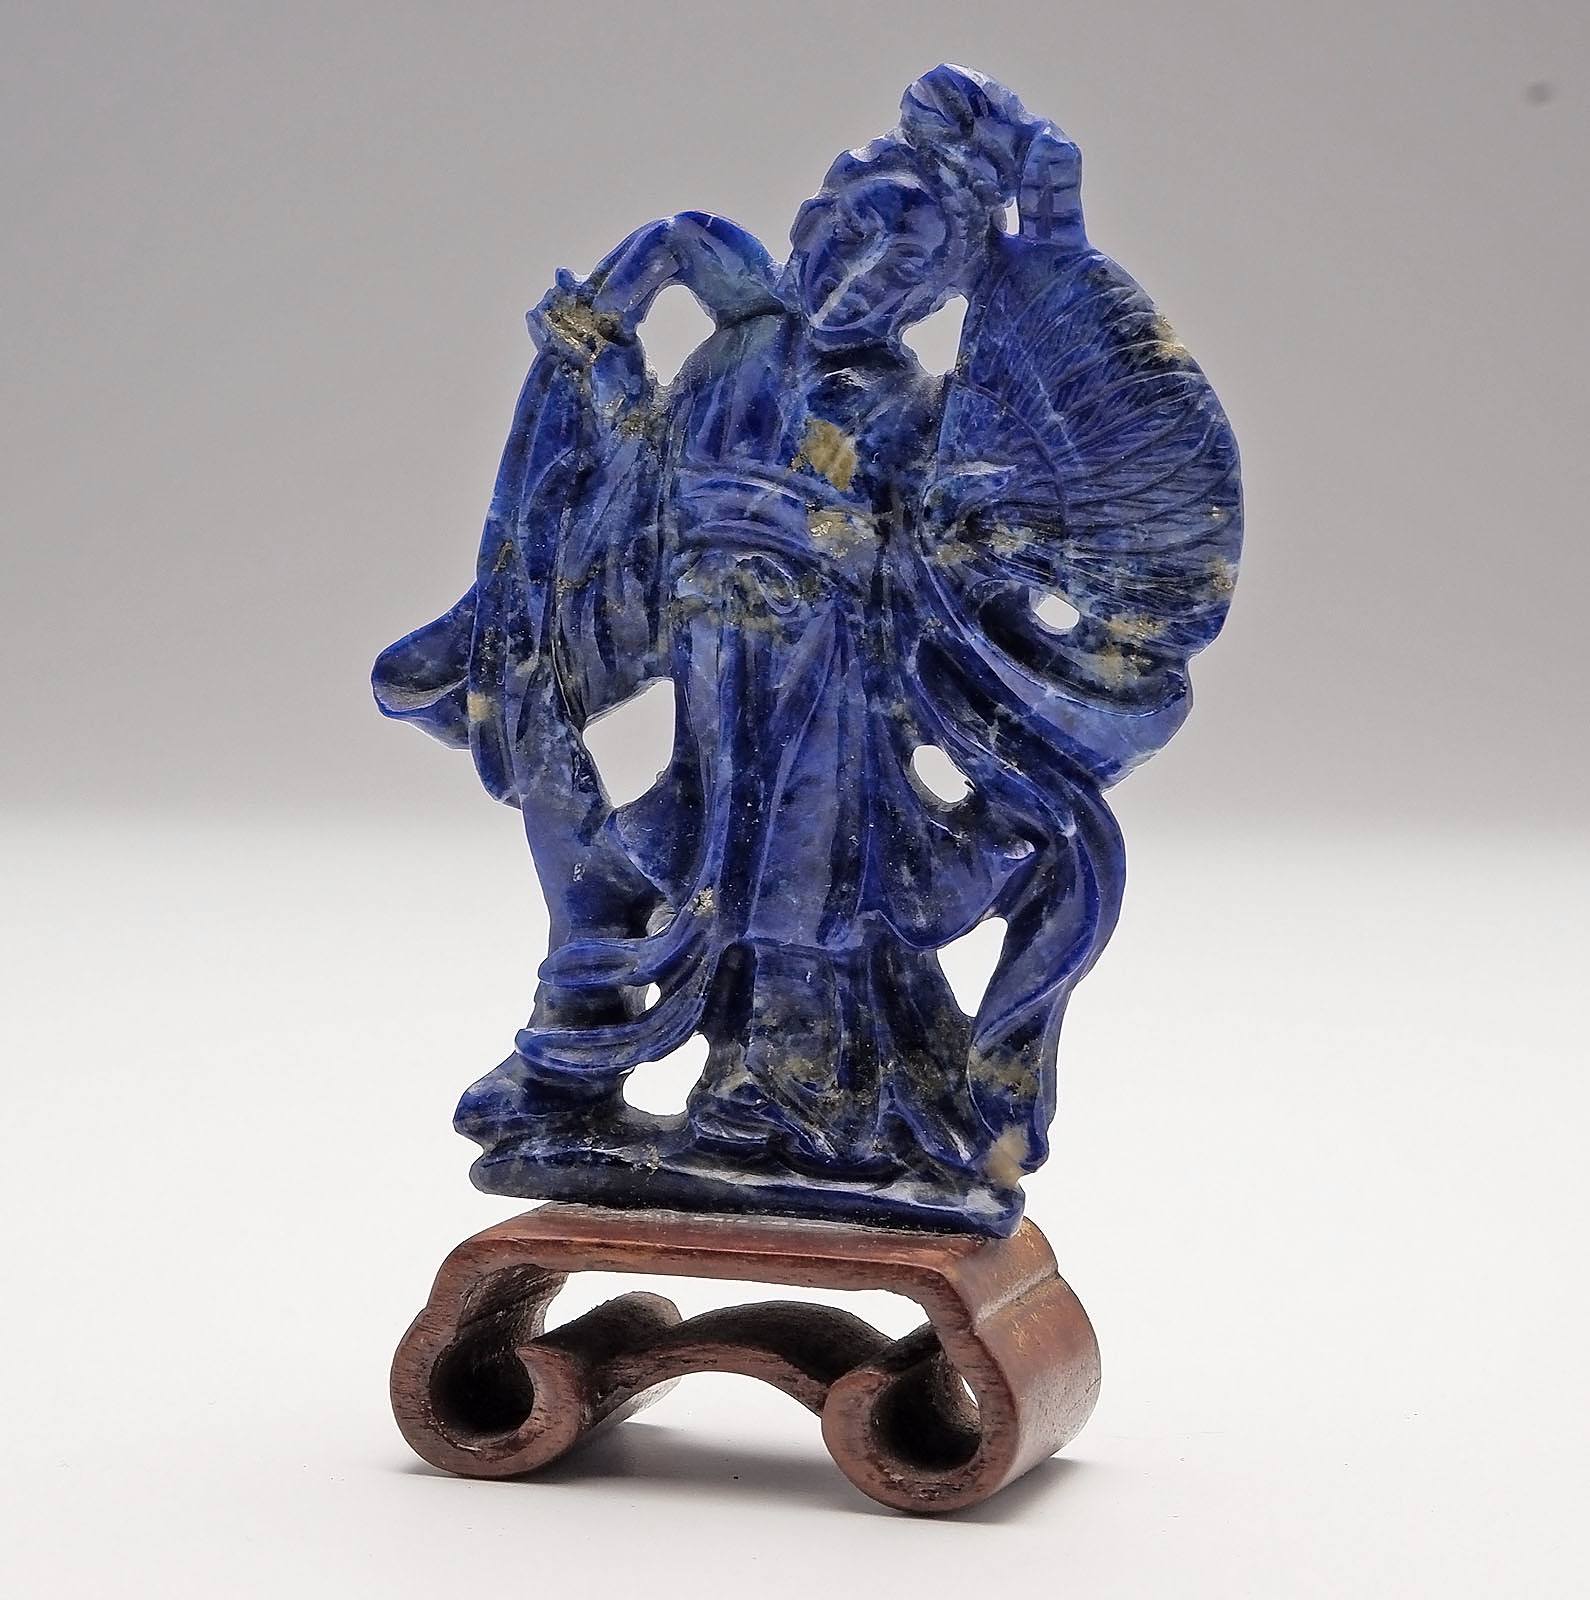 'Small Chinese Carved Lapis Lazuli Figure of a Lady with Fan on Hardwood Stand'